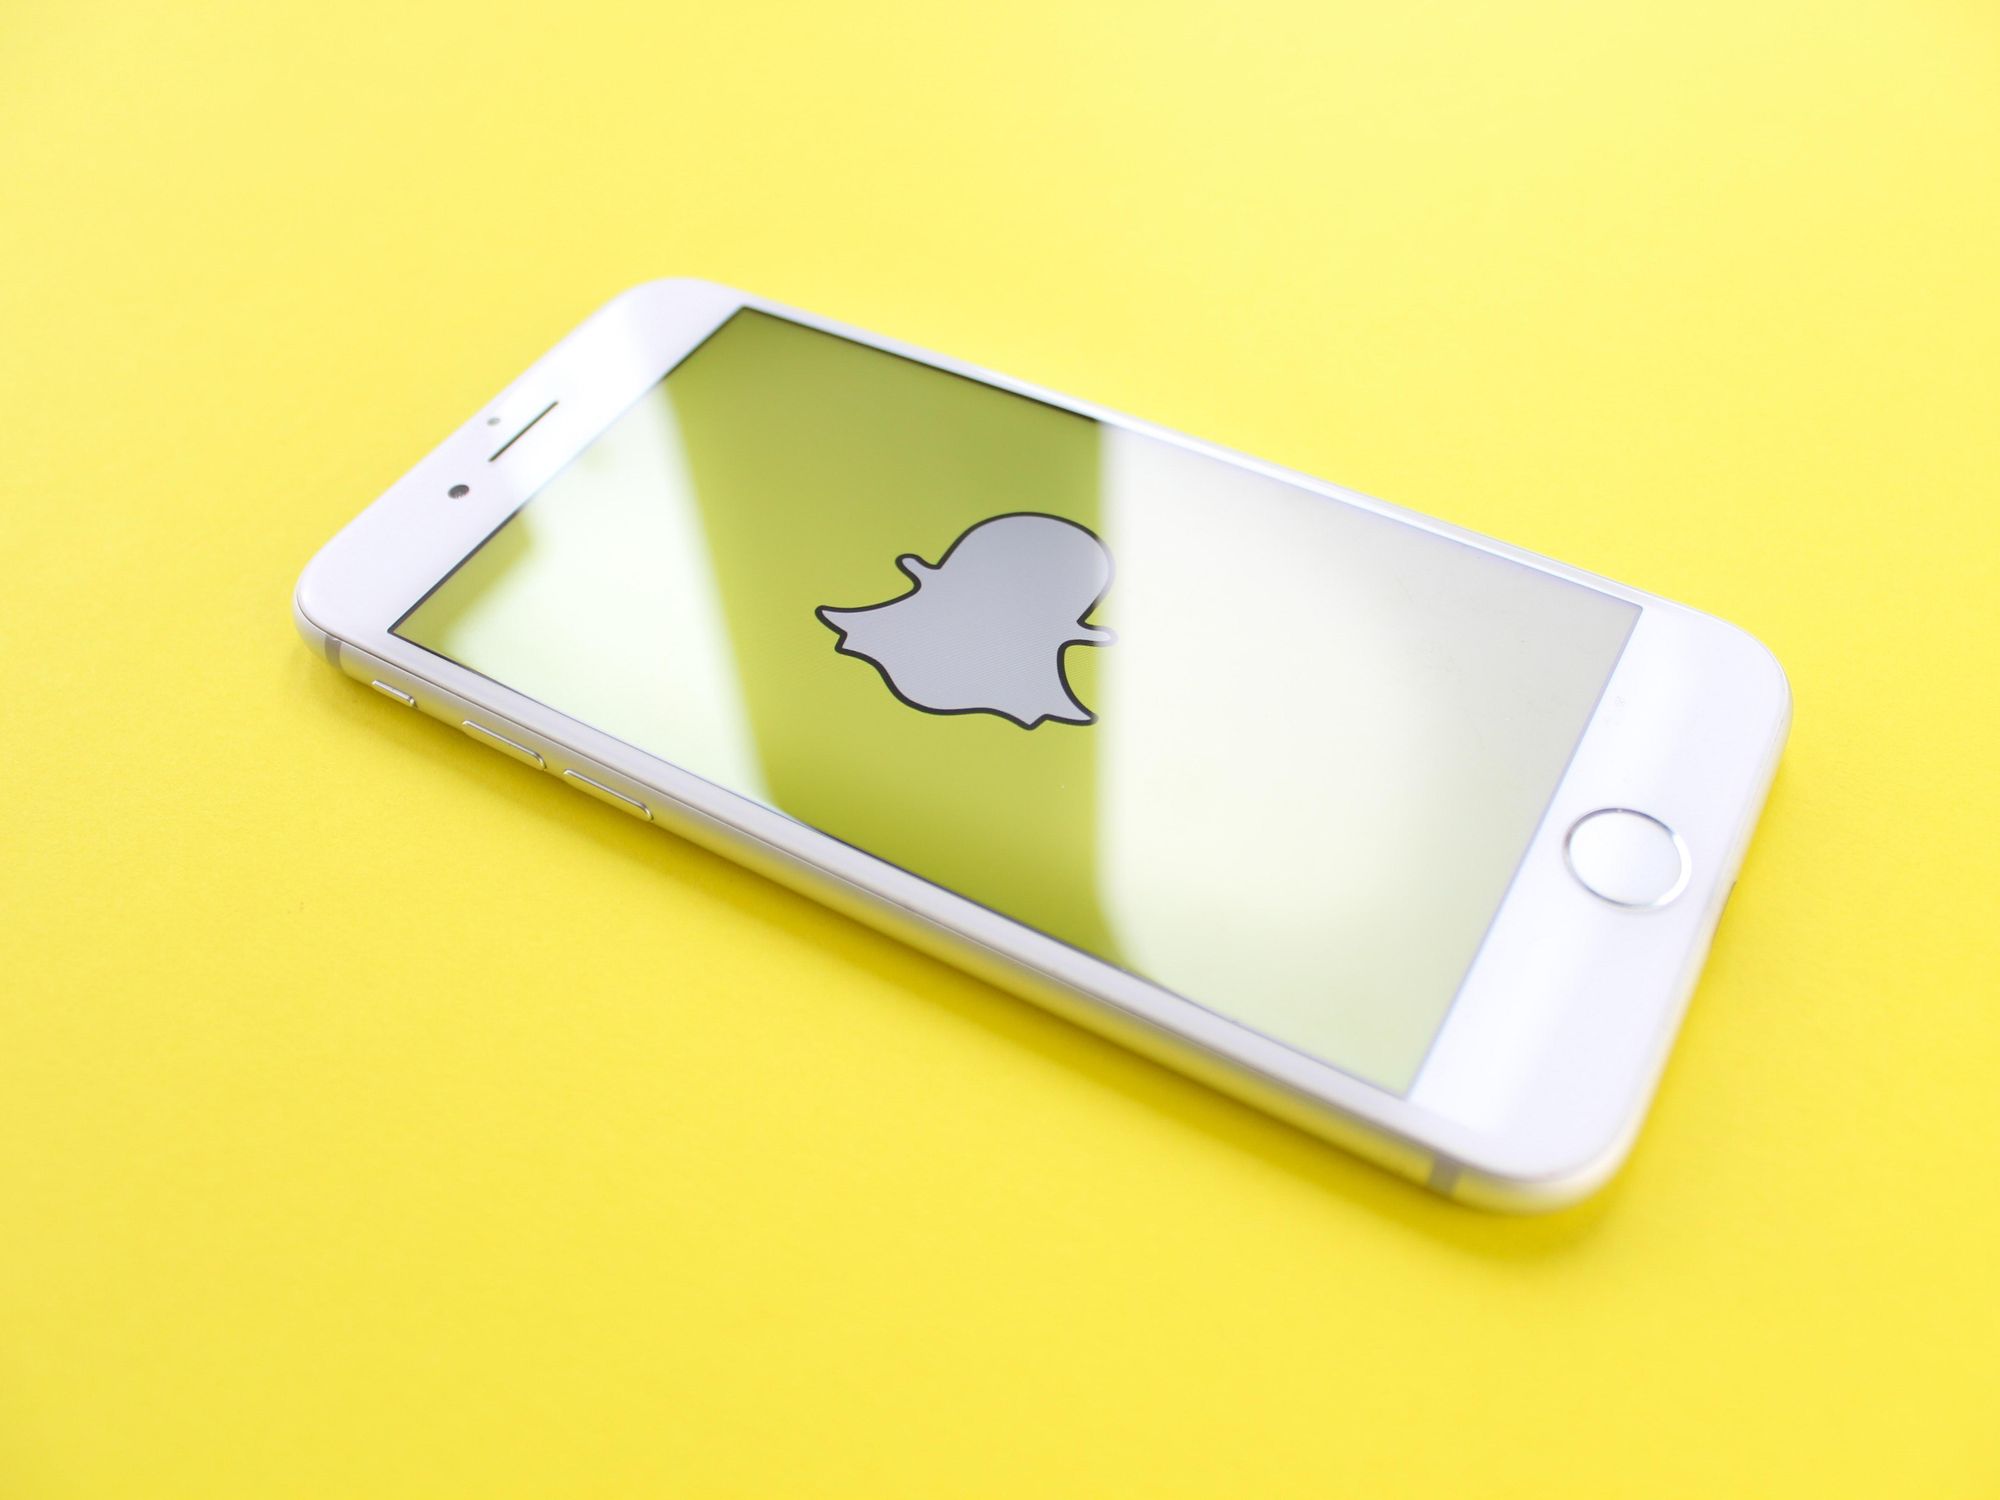 Is Snapchat Ready to Take on Zoom?